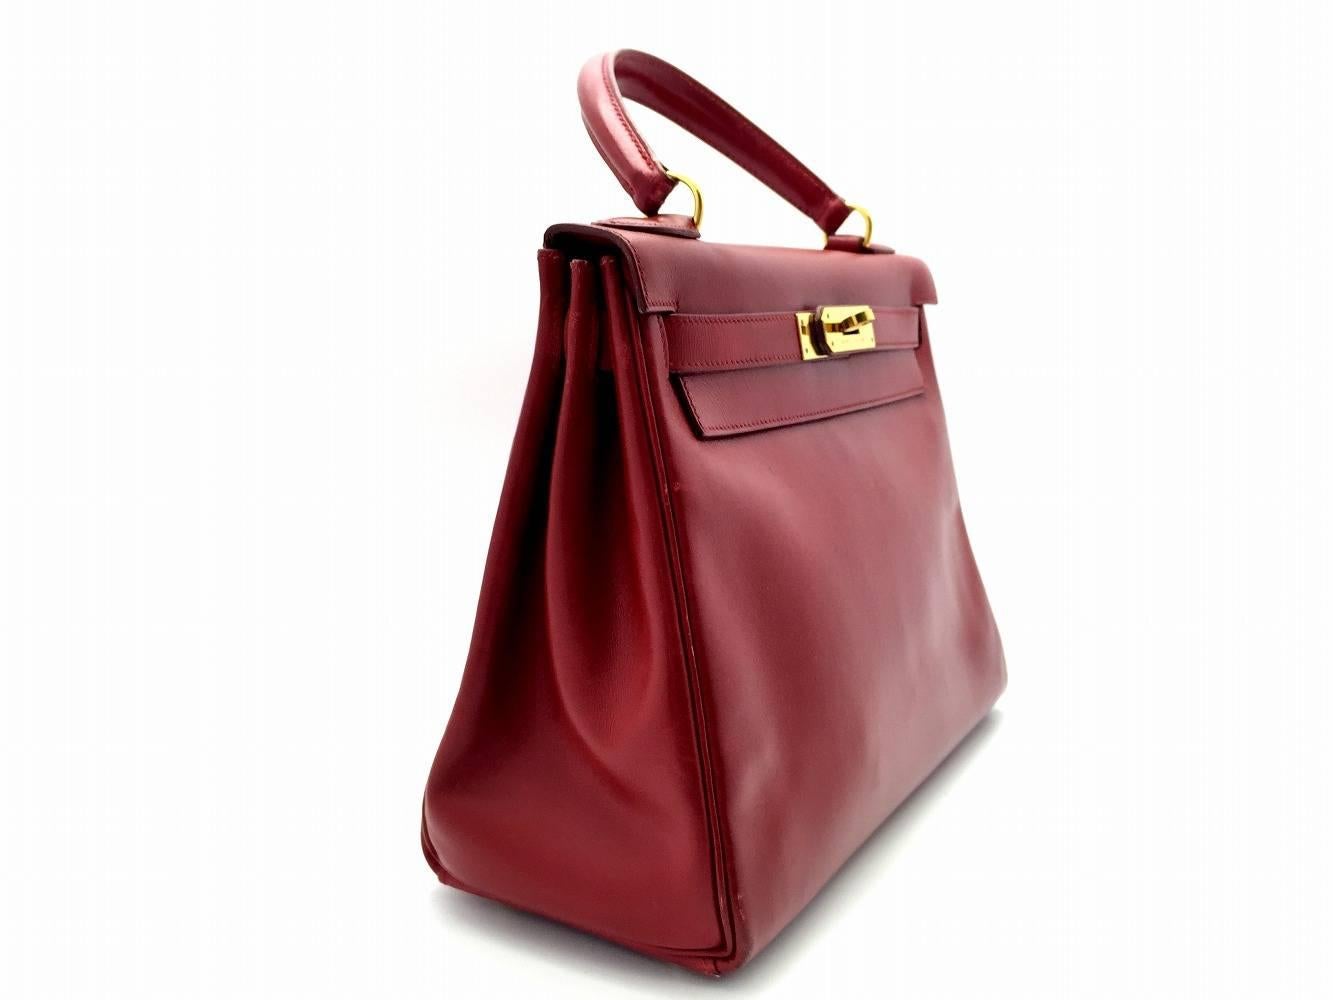 Color: Red / Rouge Garance (designer color) 

Material: Box Calf Leather

Condition: Rank A 
Overall: Good, few minor defects
Surface: Minor Stains
Corners: Minor Stains & Stains
Edges: Minor Stains & Stains
Handles/Straps: Minor Stains